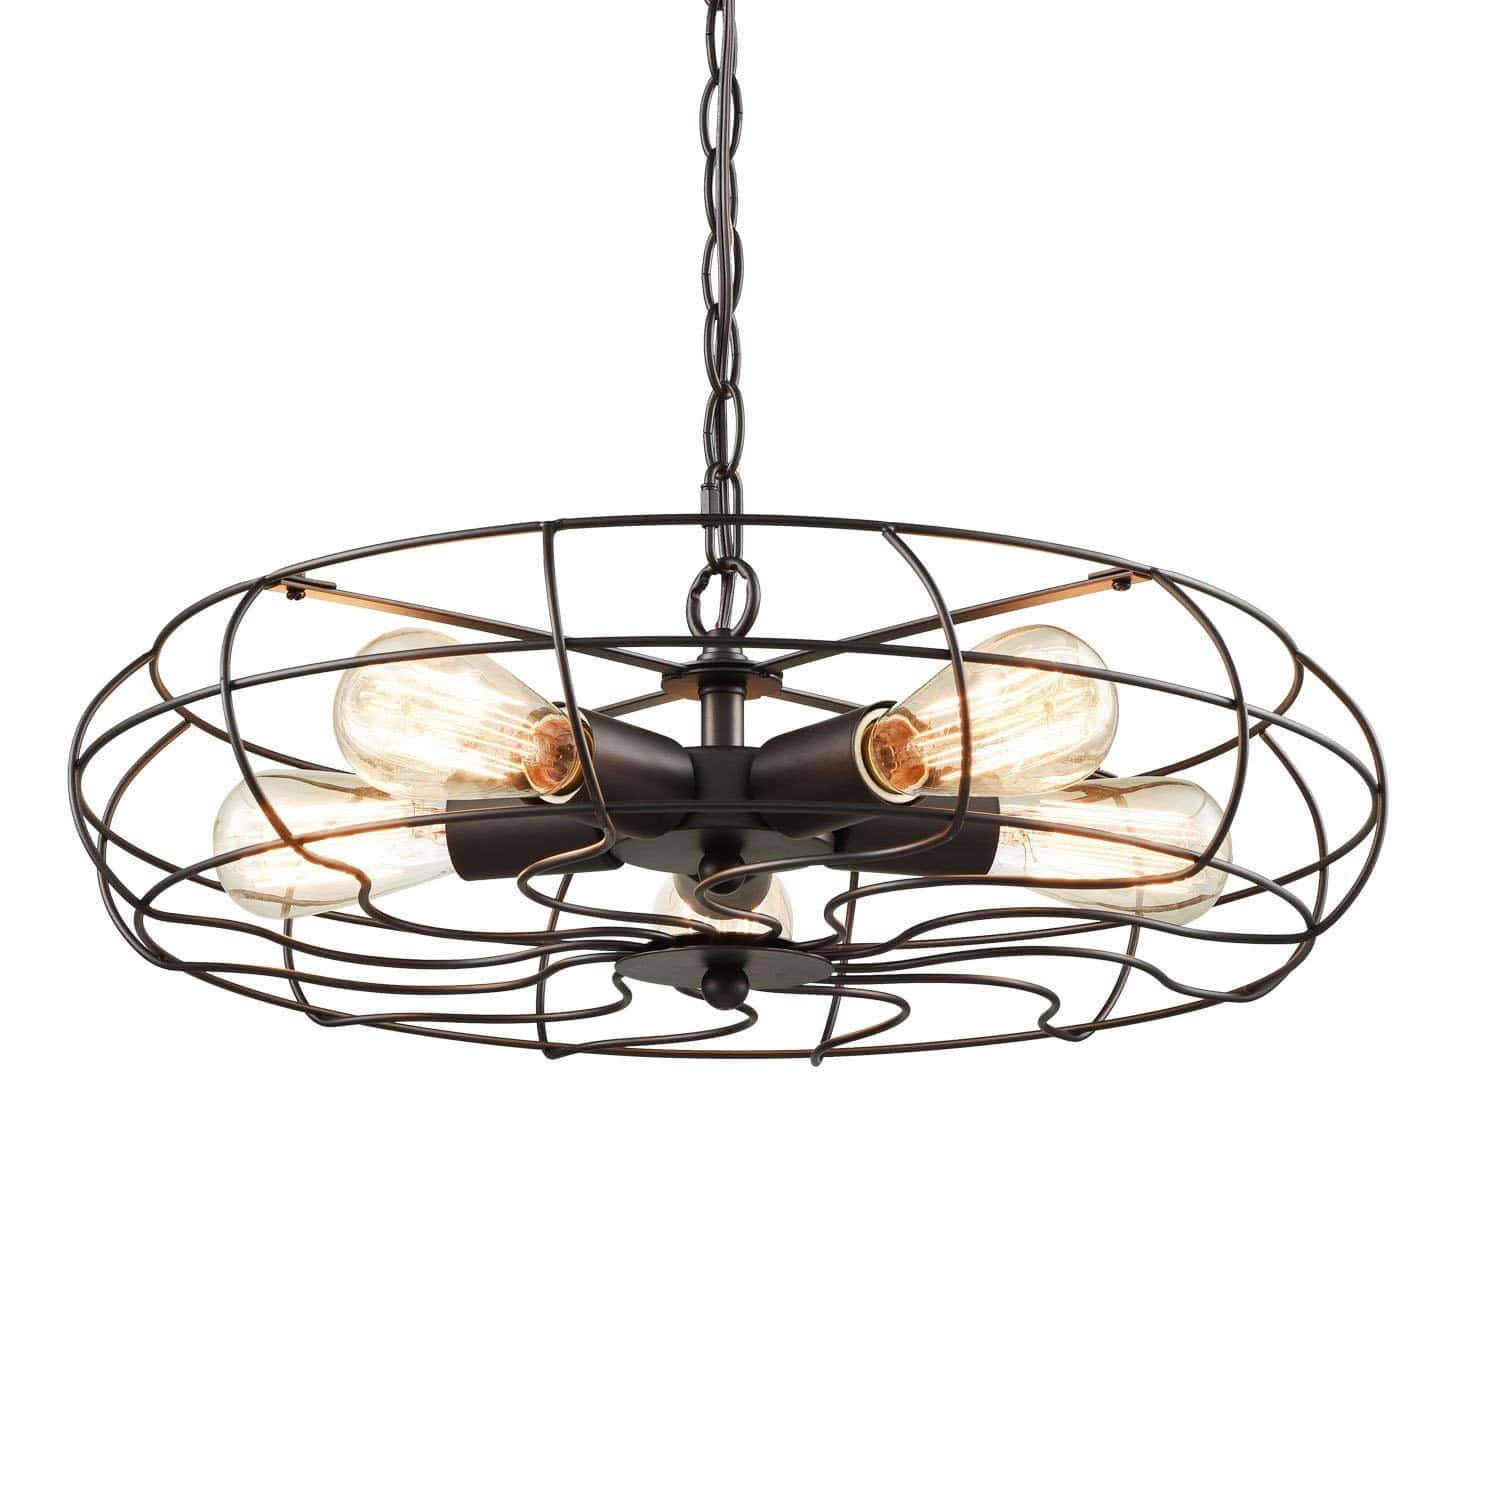 Industrial Metal Cage Hanging Pendant Chandelier with Chain, 5 Lights